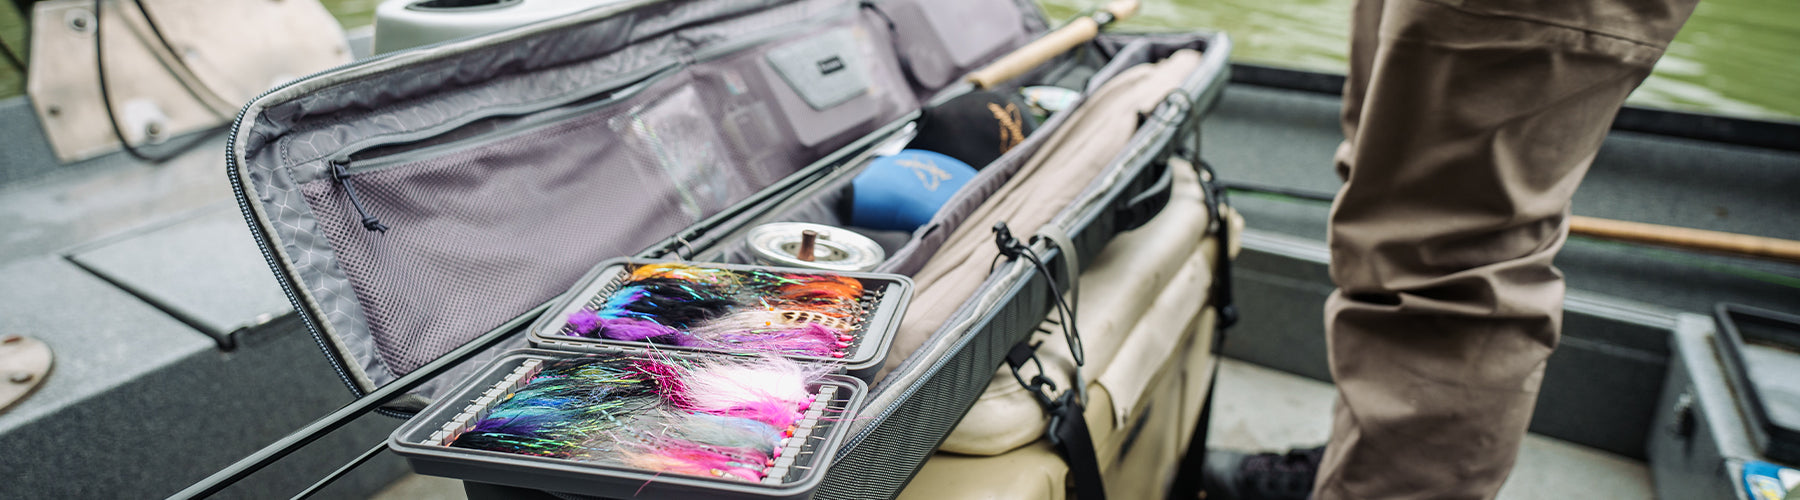 Fly-Fishing-Reel-And-Rod-Cases